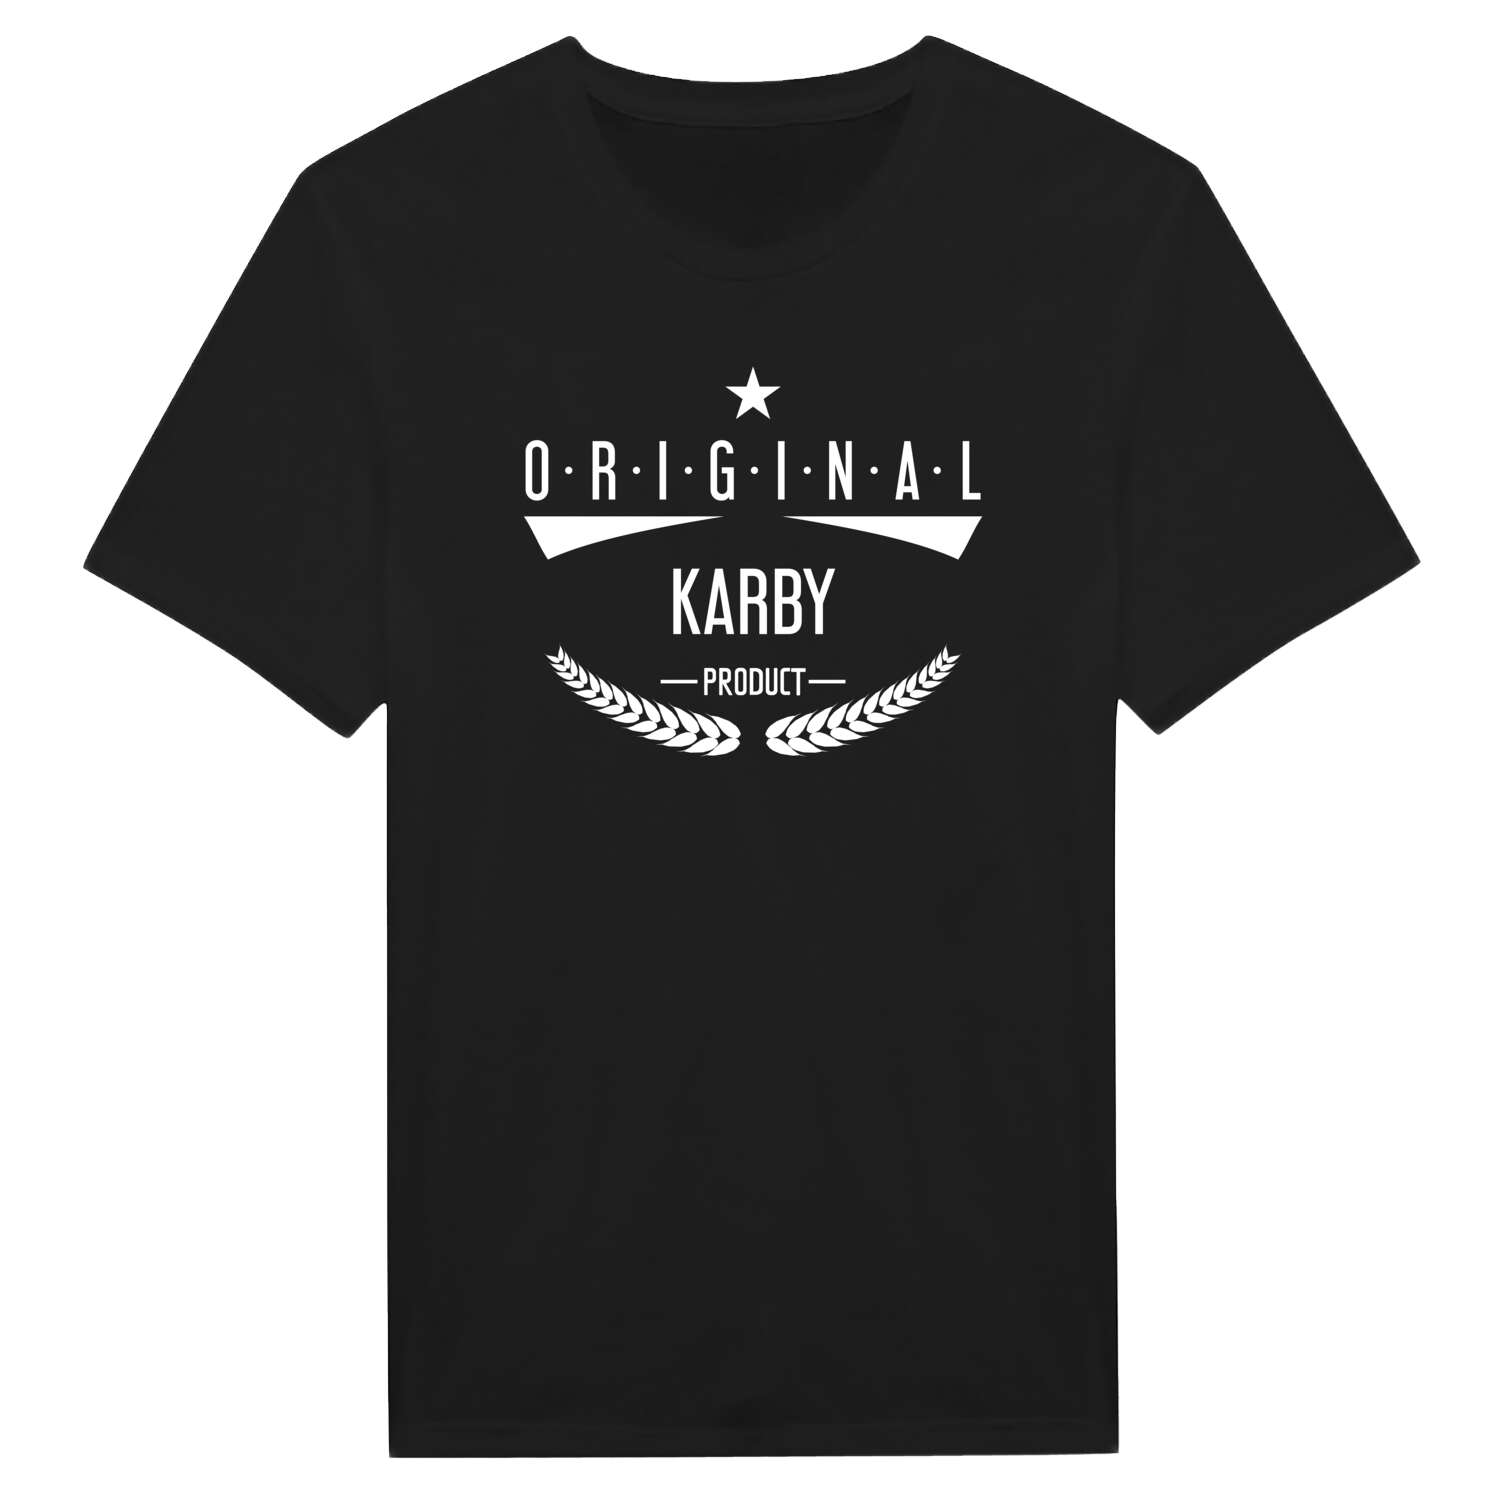 Karby T-Shirt »Original Product«